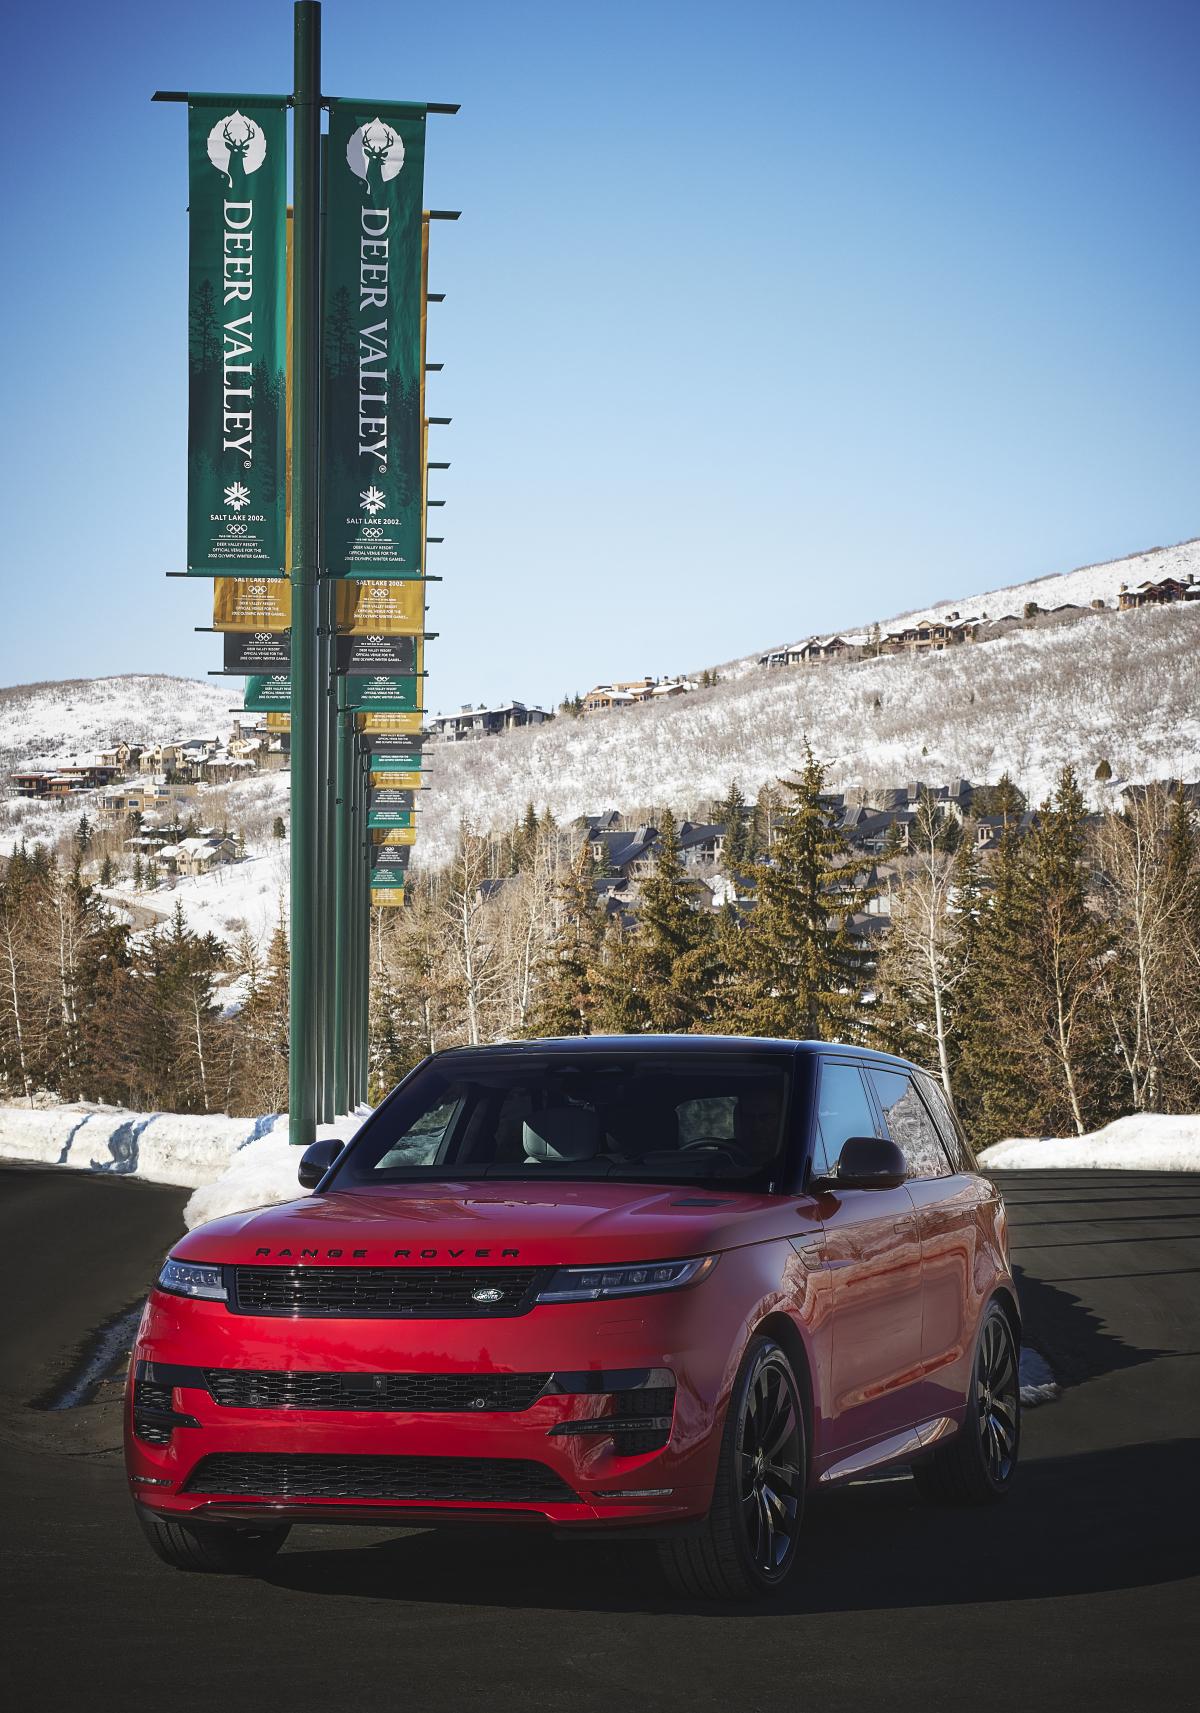 Range Rover Announces Multi Year Partnership With Deer Valley